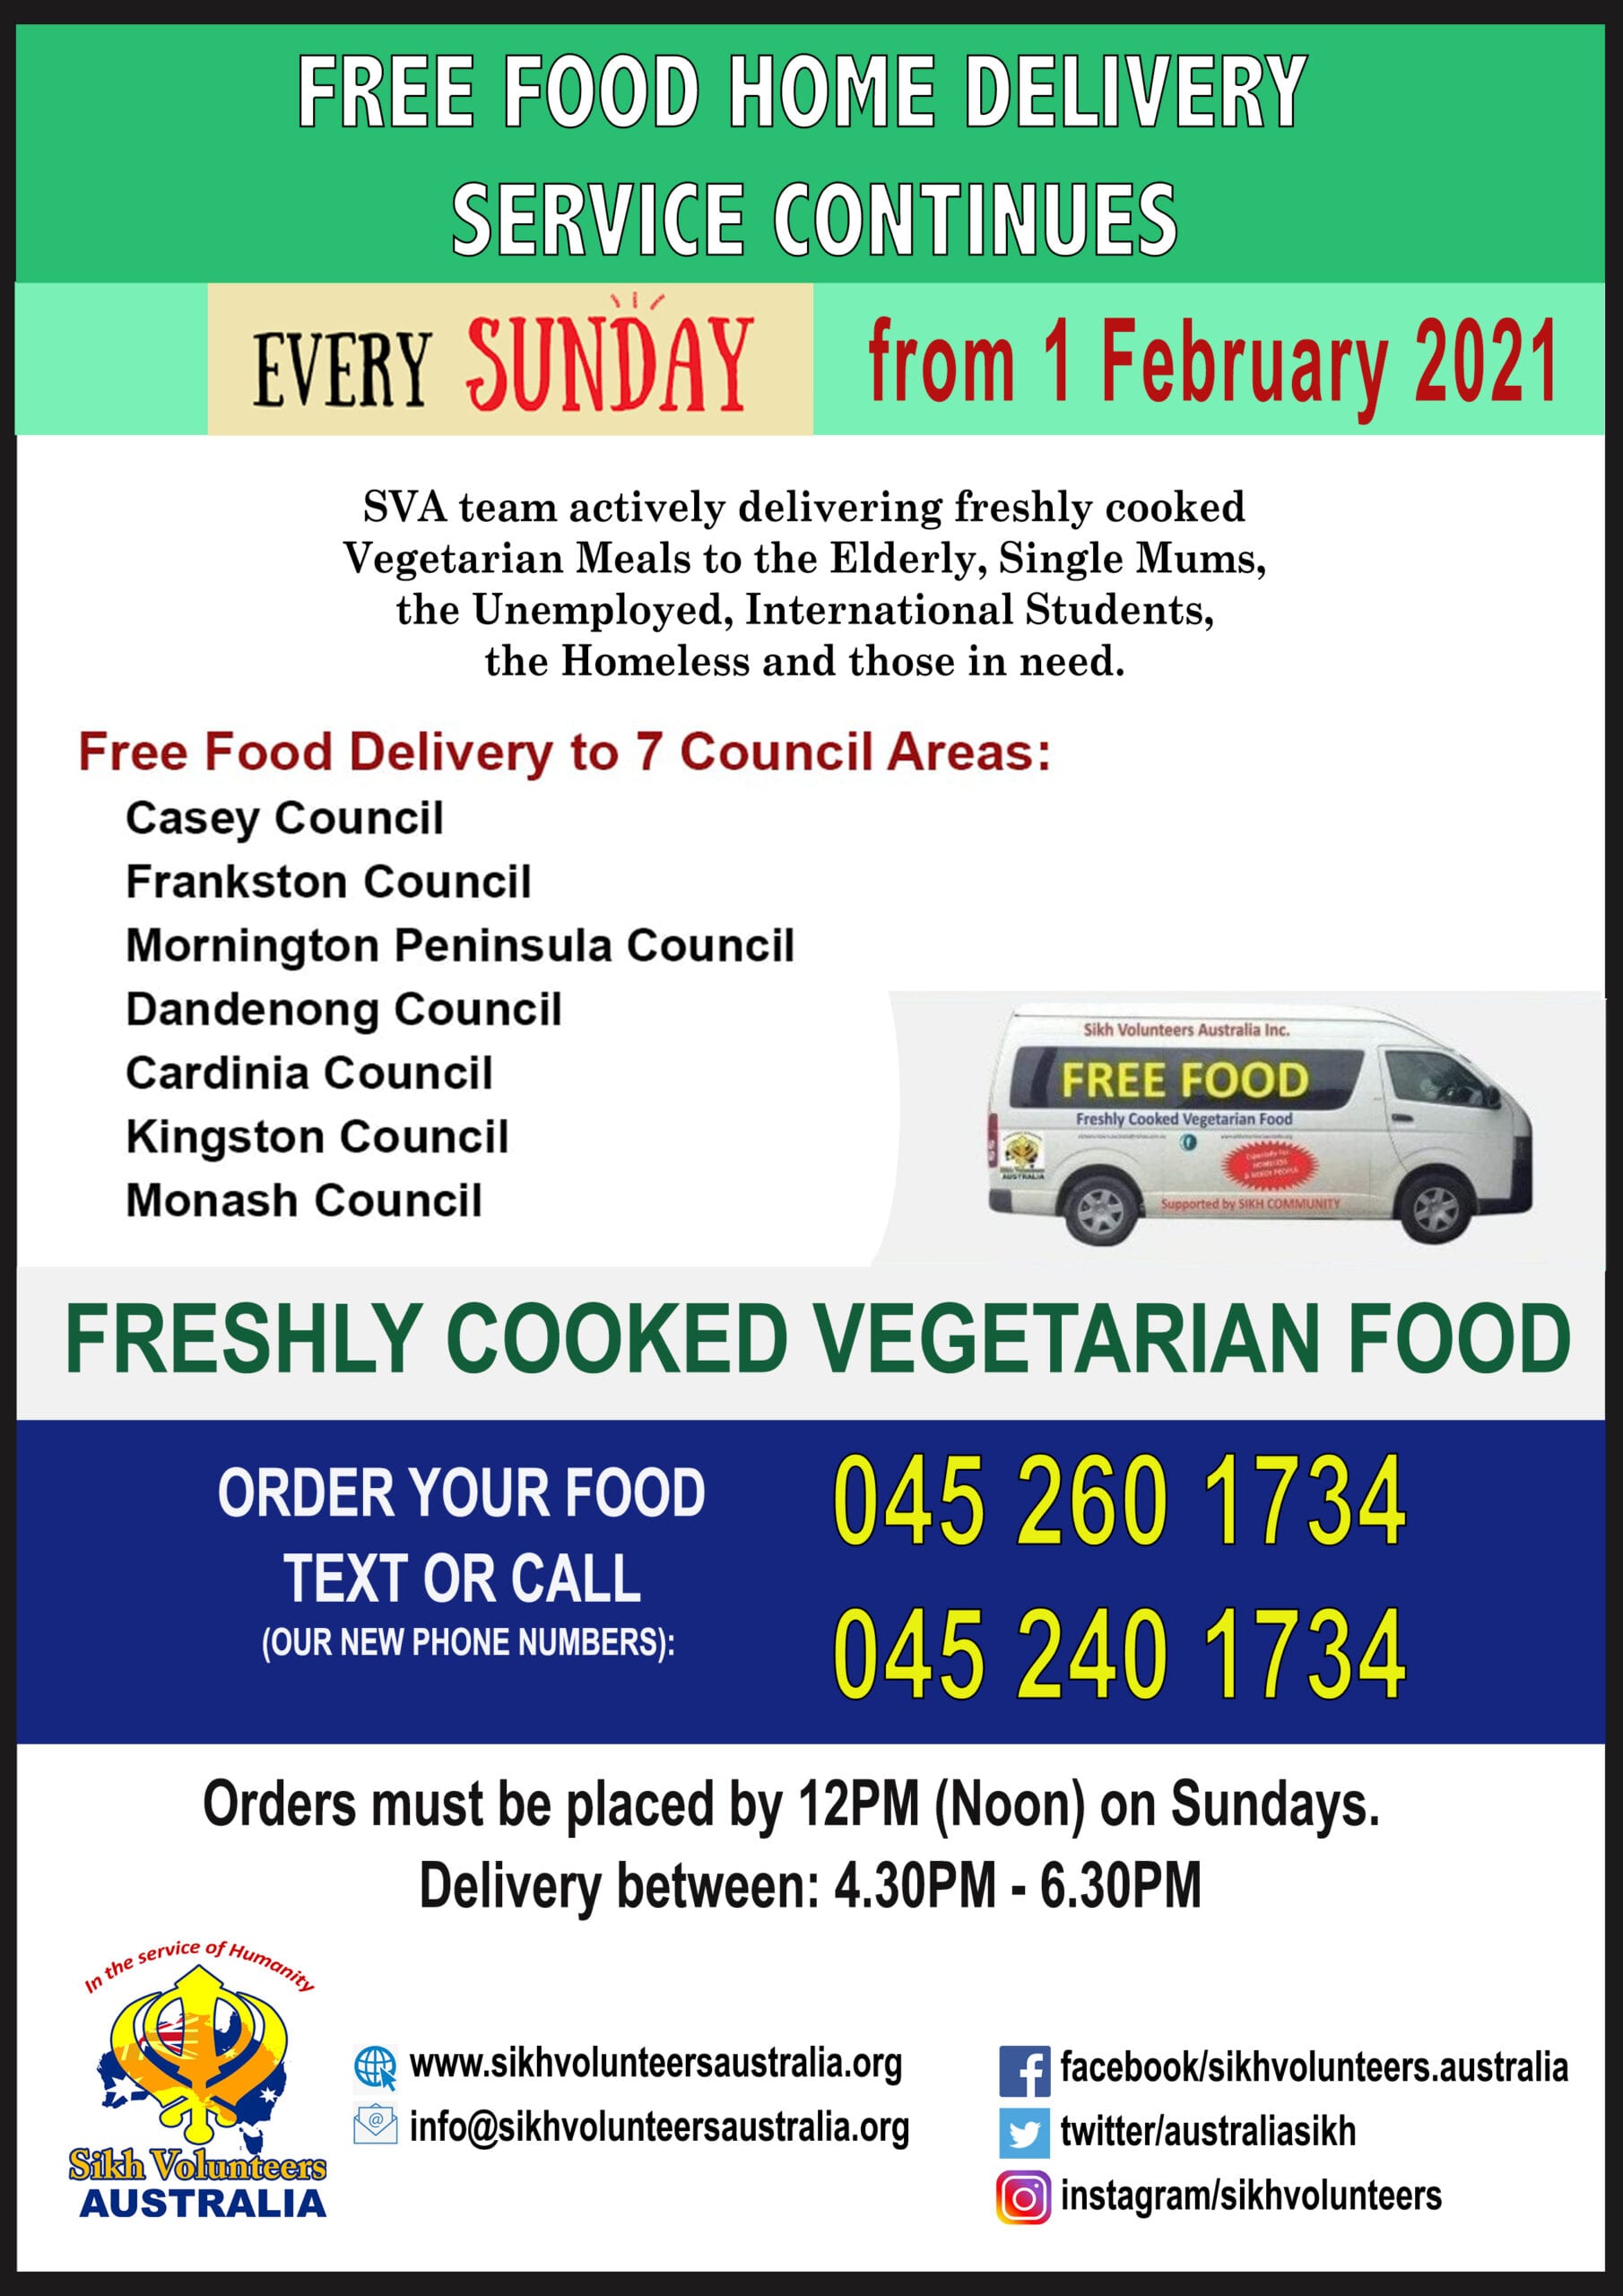 Free Food Home Delivery Service 2021 | Sikh Volunteers Australia Inc.